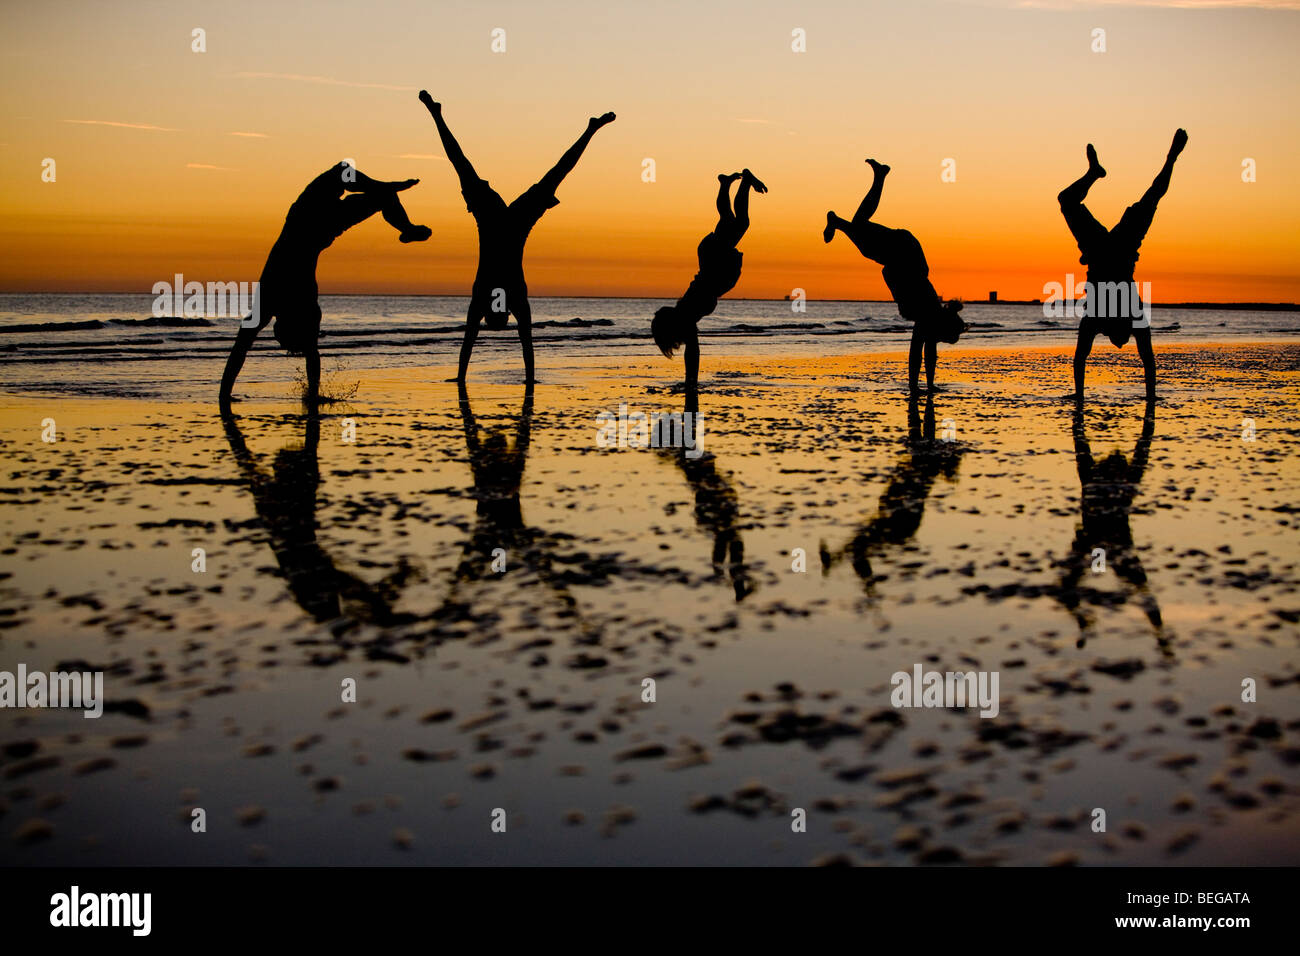 Friends playing on the beach silhouetted against an evening sky. Stock Photo